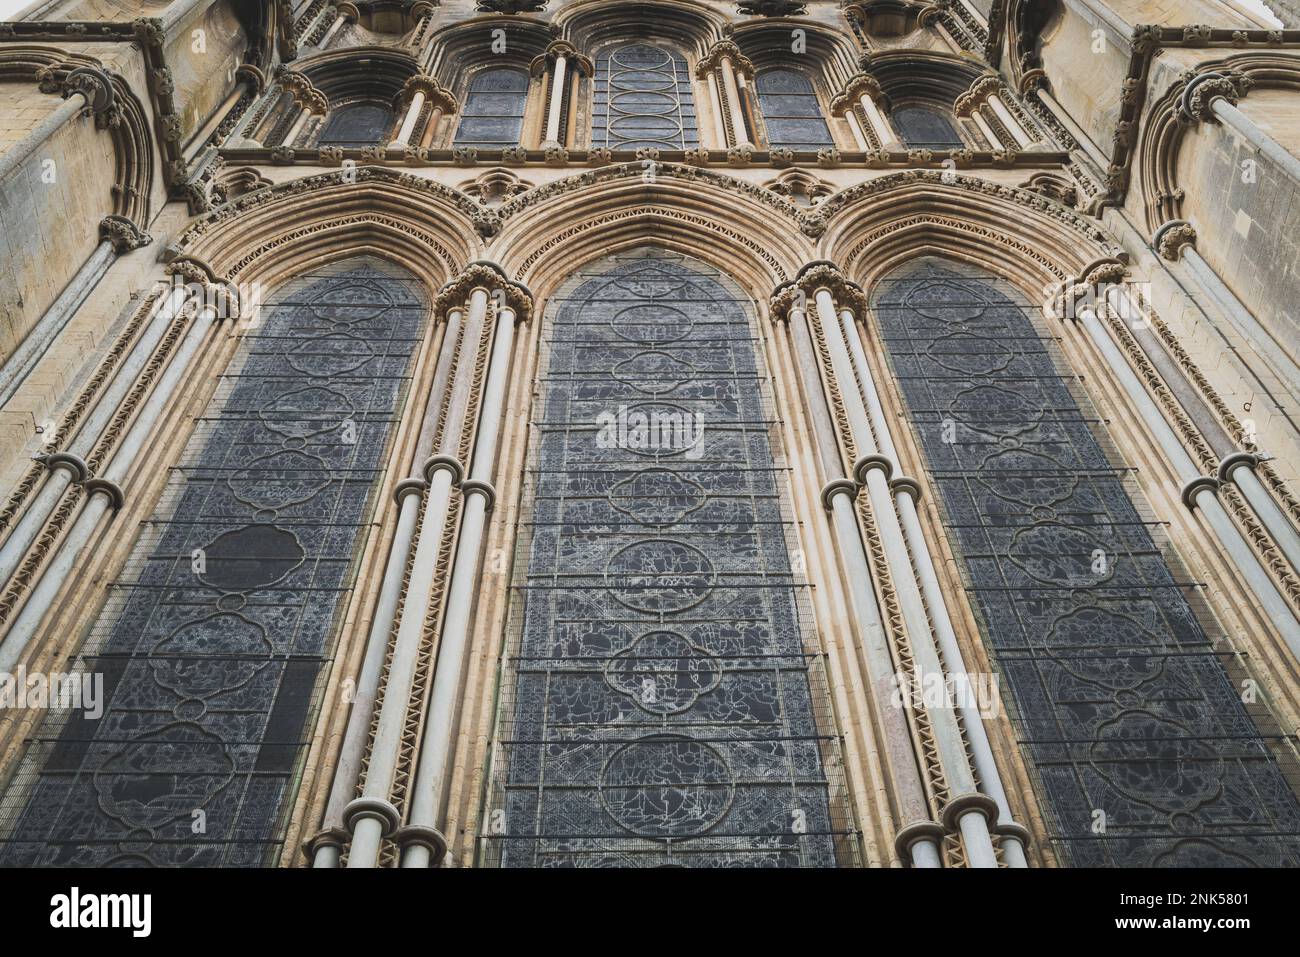 Dramatic vertical view of a historical cathedral showing the huge stained glass windows and ornate stonework. Stock Photo